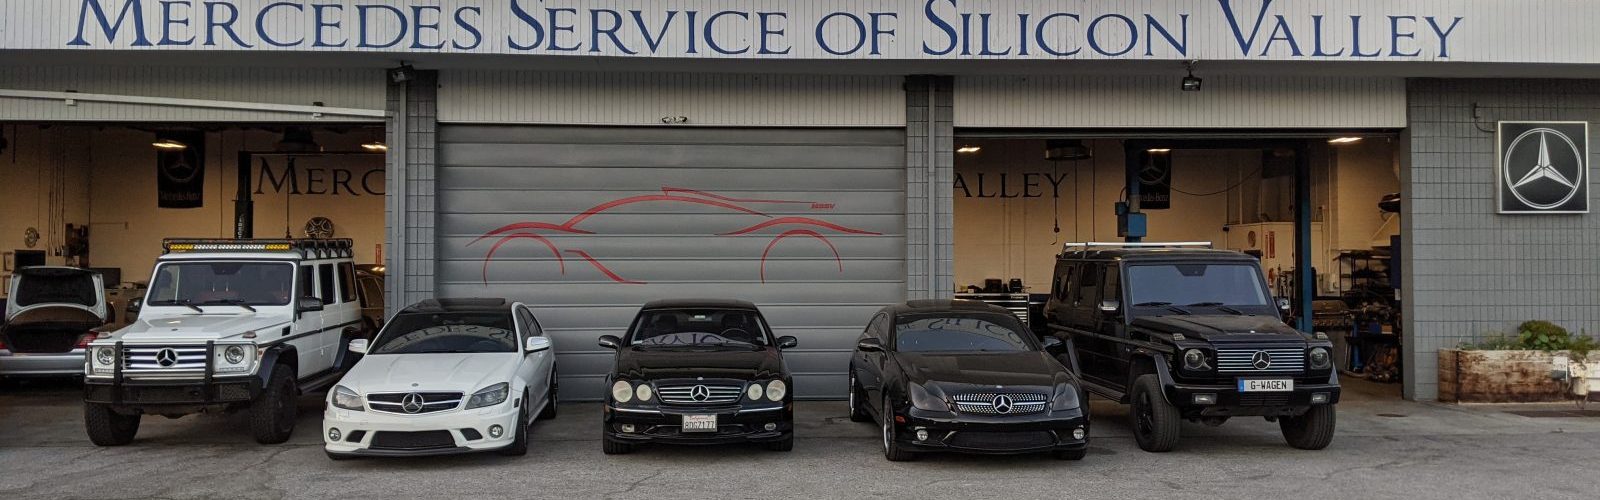 Mercedes Service of Silicon Valley